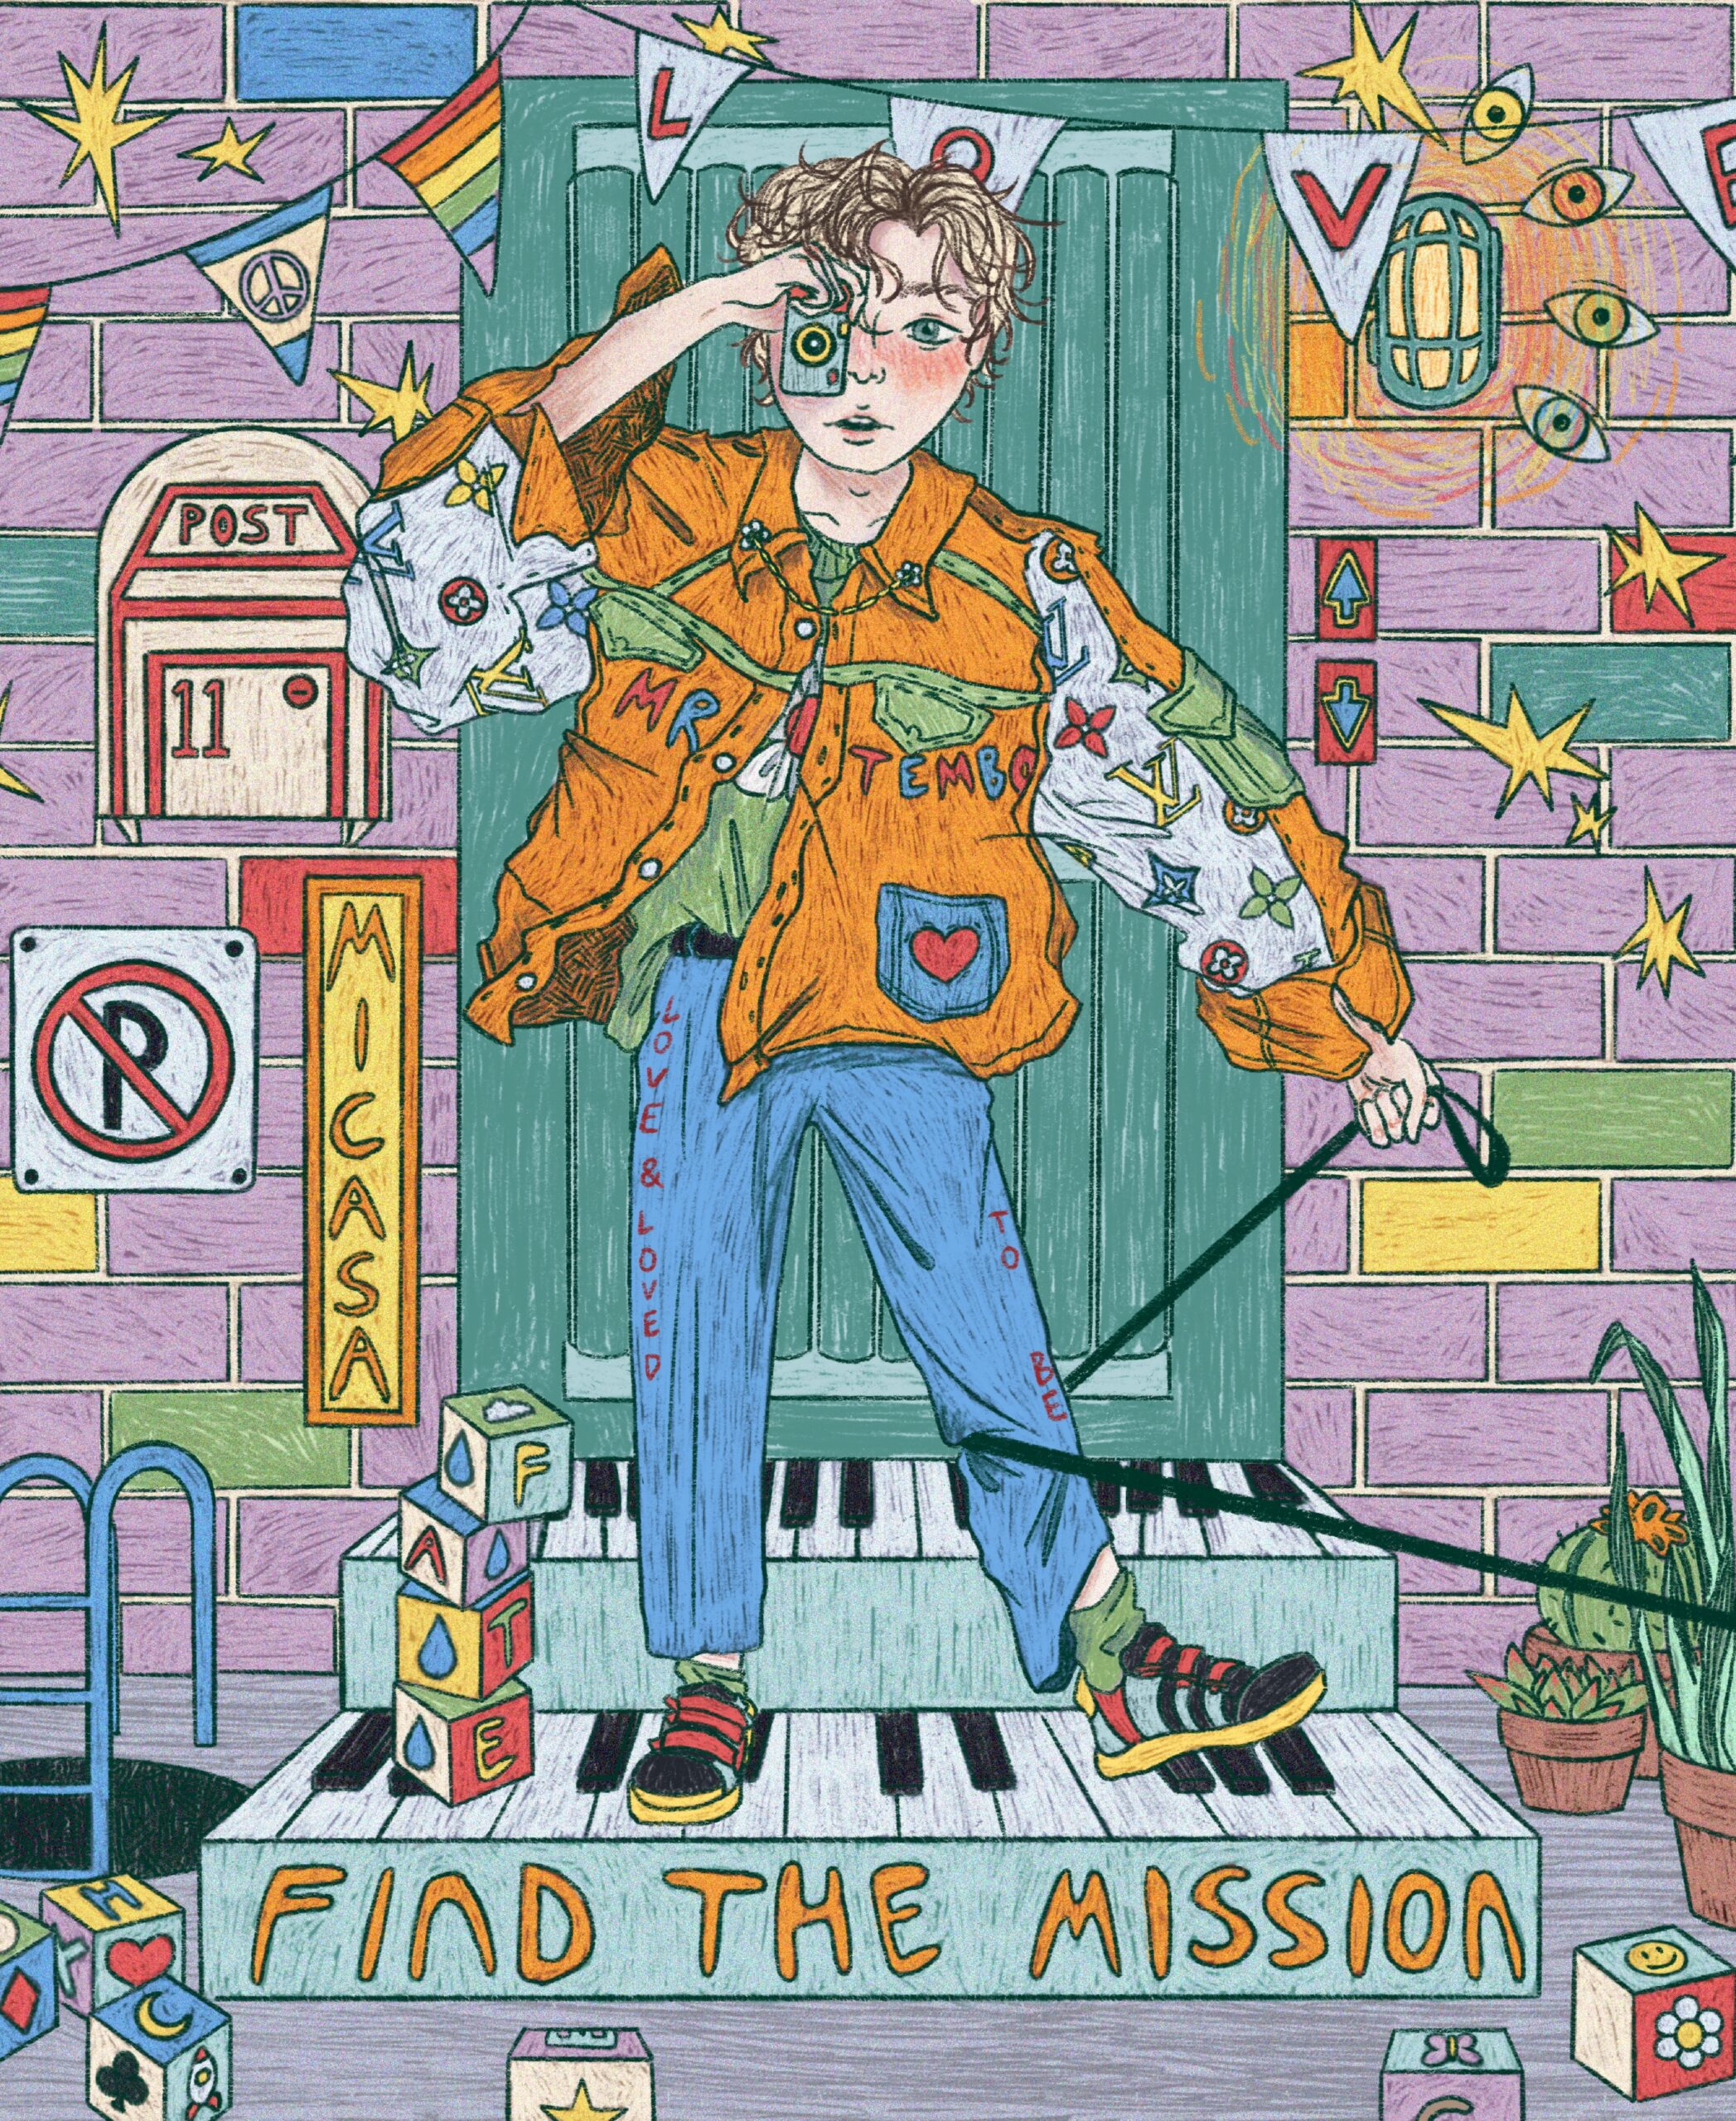 A small stage comprised of piano keys is labeled “find the mission” with orange bubble lettering. A young pale person with short messy hair stands on stage in an active pose, clothes in movement and disarray, aiming a camera at the viewer while staring through the viewfinder with one eye. ‘Mr. Tembo’ is written on their oversized patterned jacket, and their jeans read ‘love and loved’ and ‘to be’ in red lettering. Banners of triangle flags festooned with peace symbols and rainbows hang in the background. Purple brick walls are festooned with busy signs. Eye symbols float around a wall-mounted light fixture. The floor is scattered with building blocks and potted cacti.